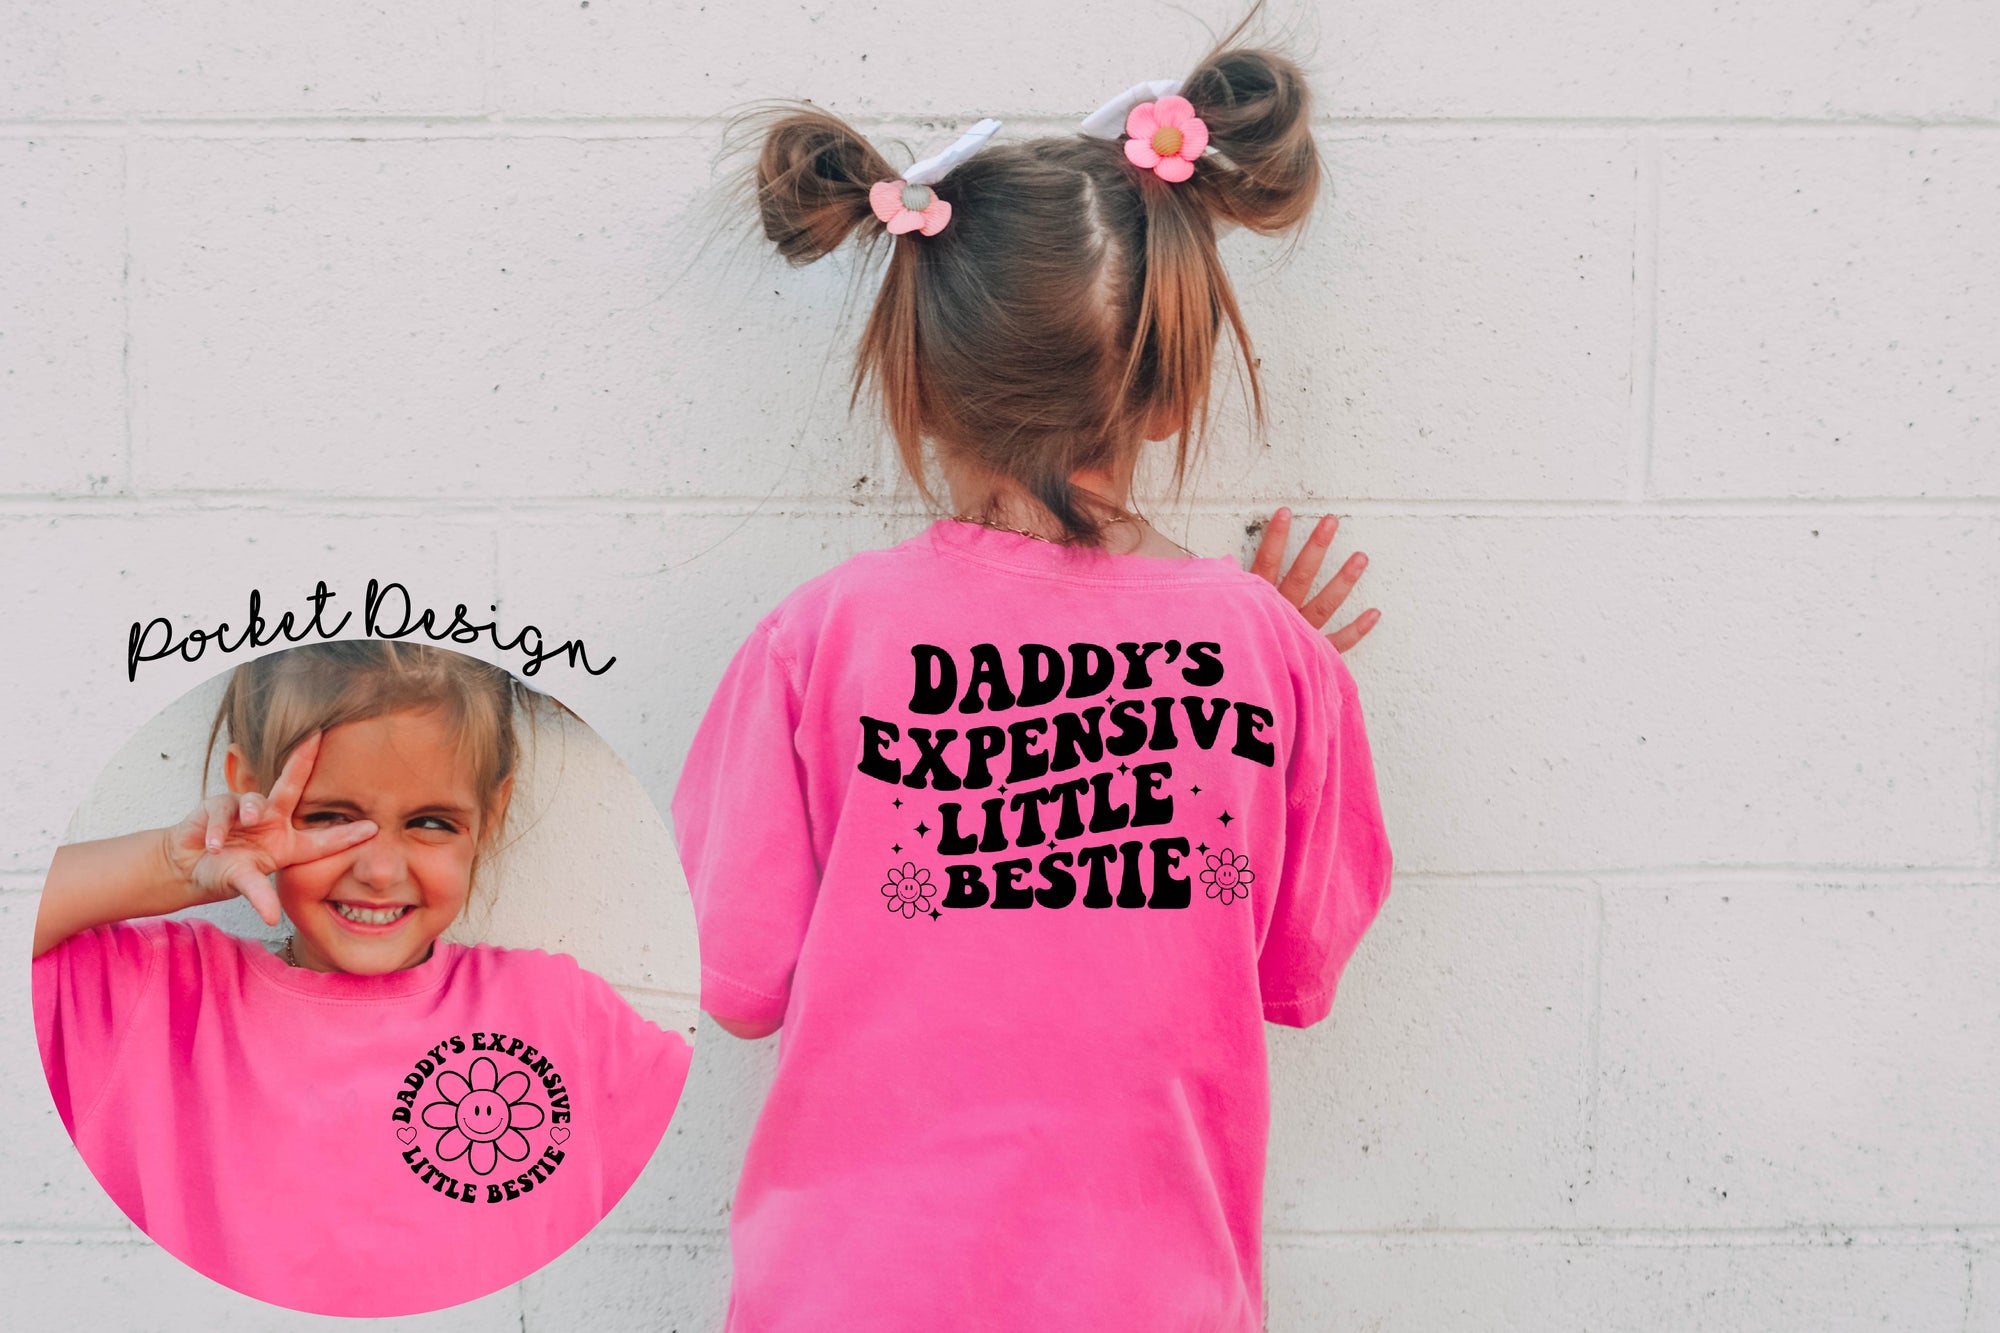 Daddy's Expensive Little Bestie/Pink (with pocket design) Sweatshirts also available